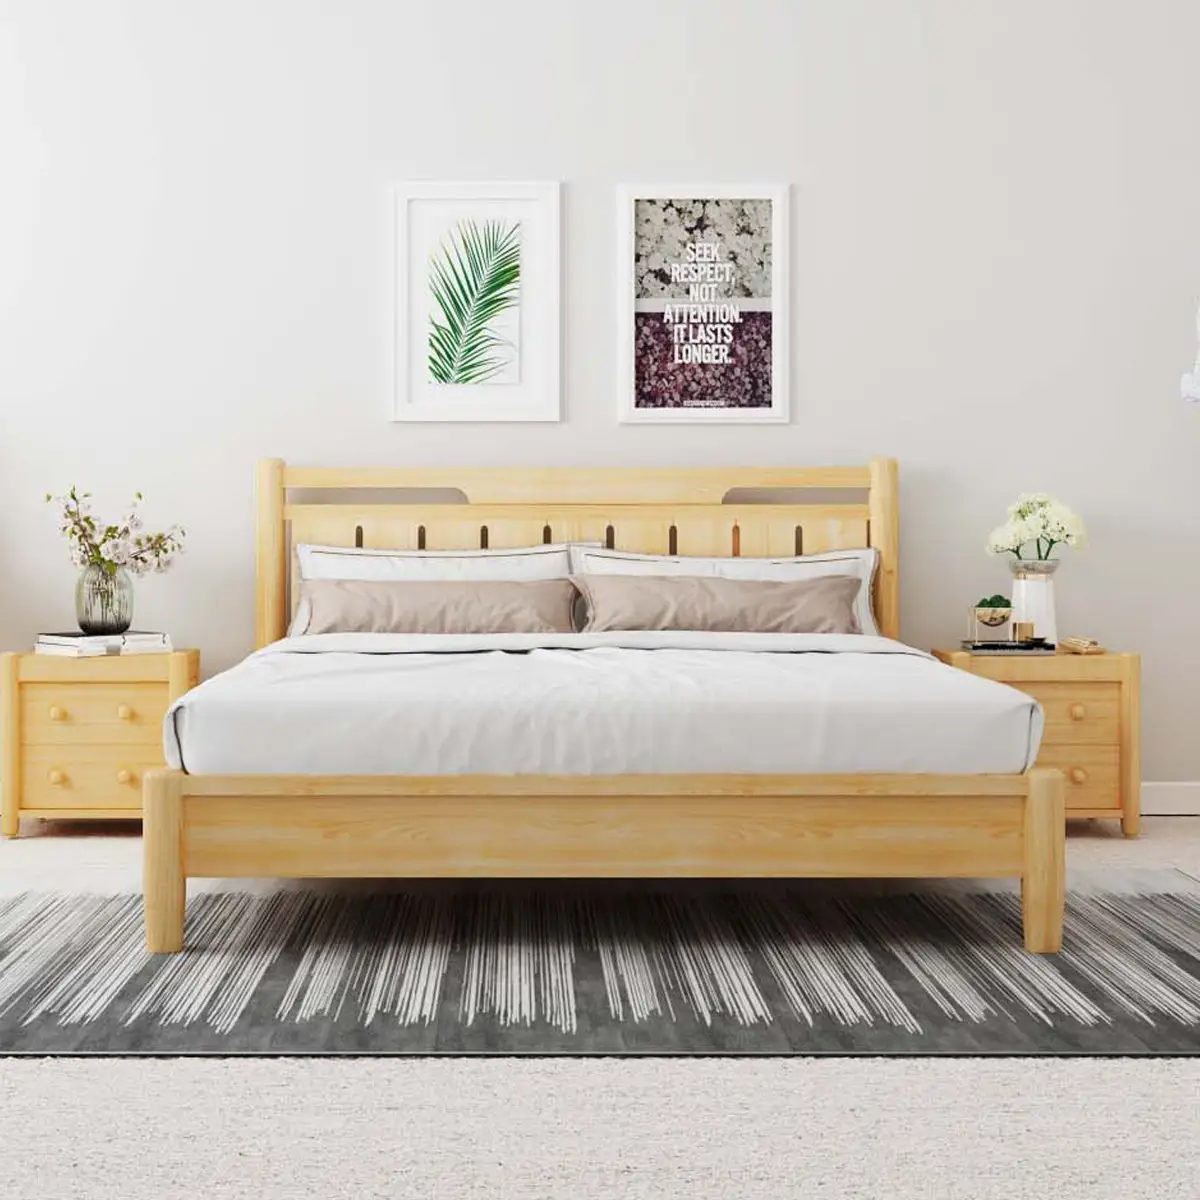 Home Furniture Bedroom Modern Double Bed 1.5m/1.8m Simple Set Pine Wood Wall Frame Style Living